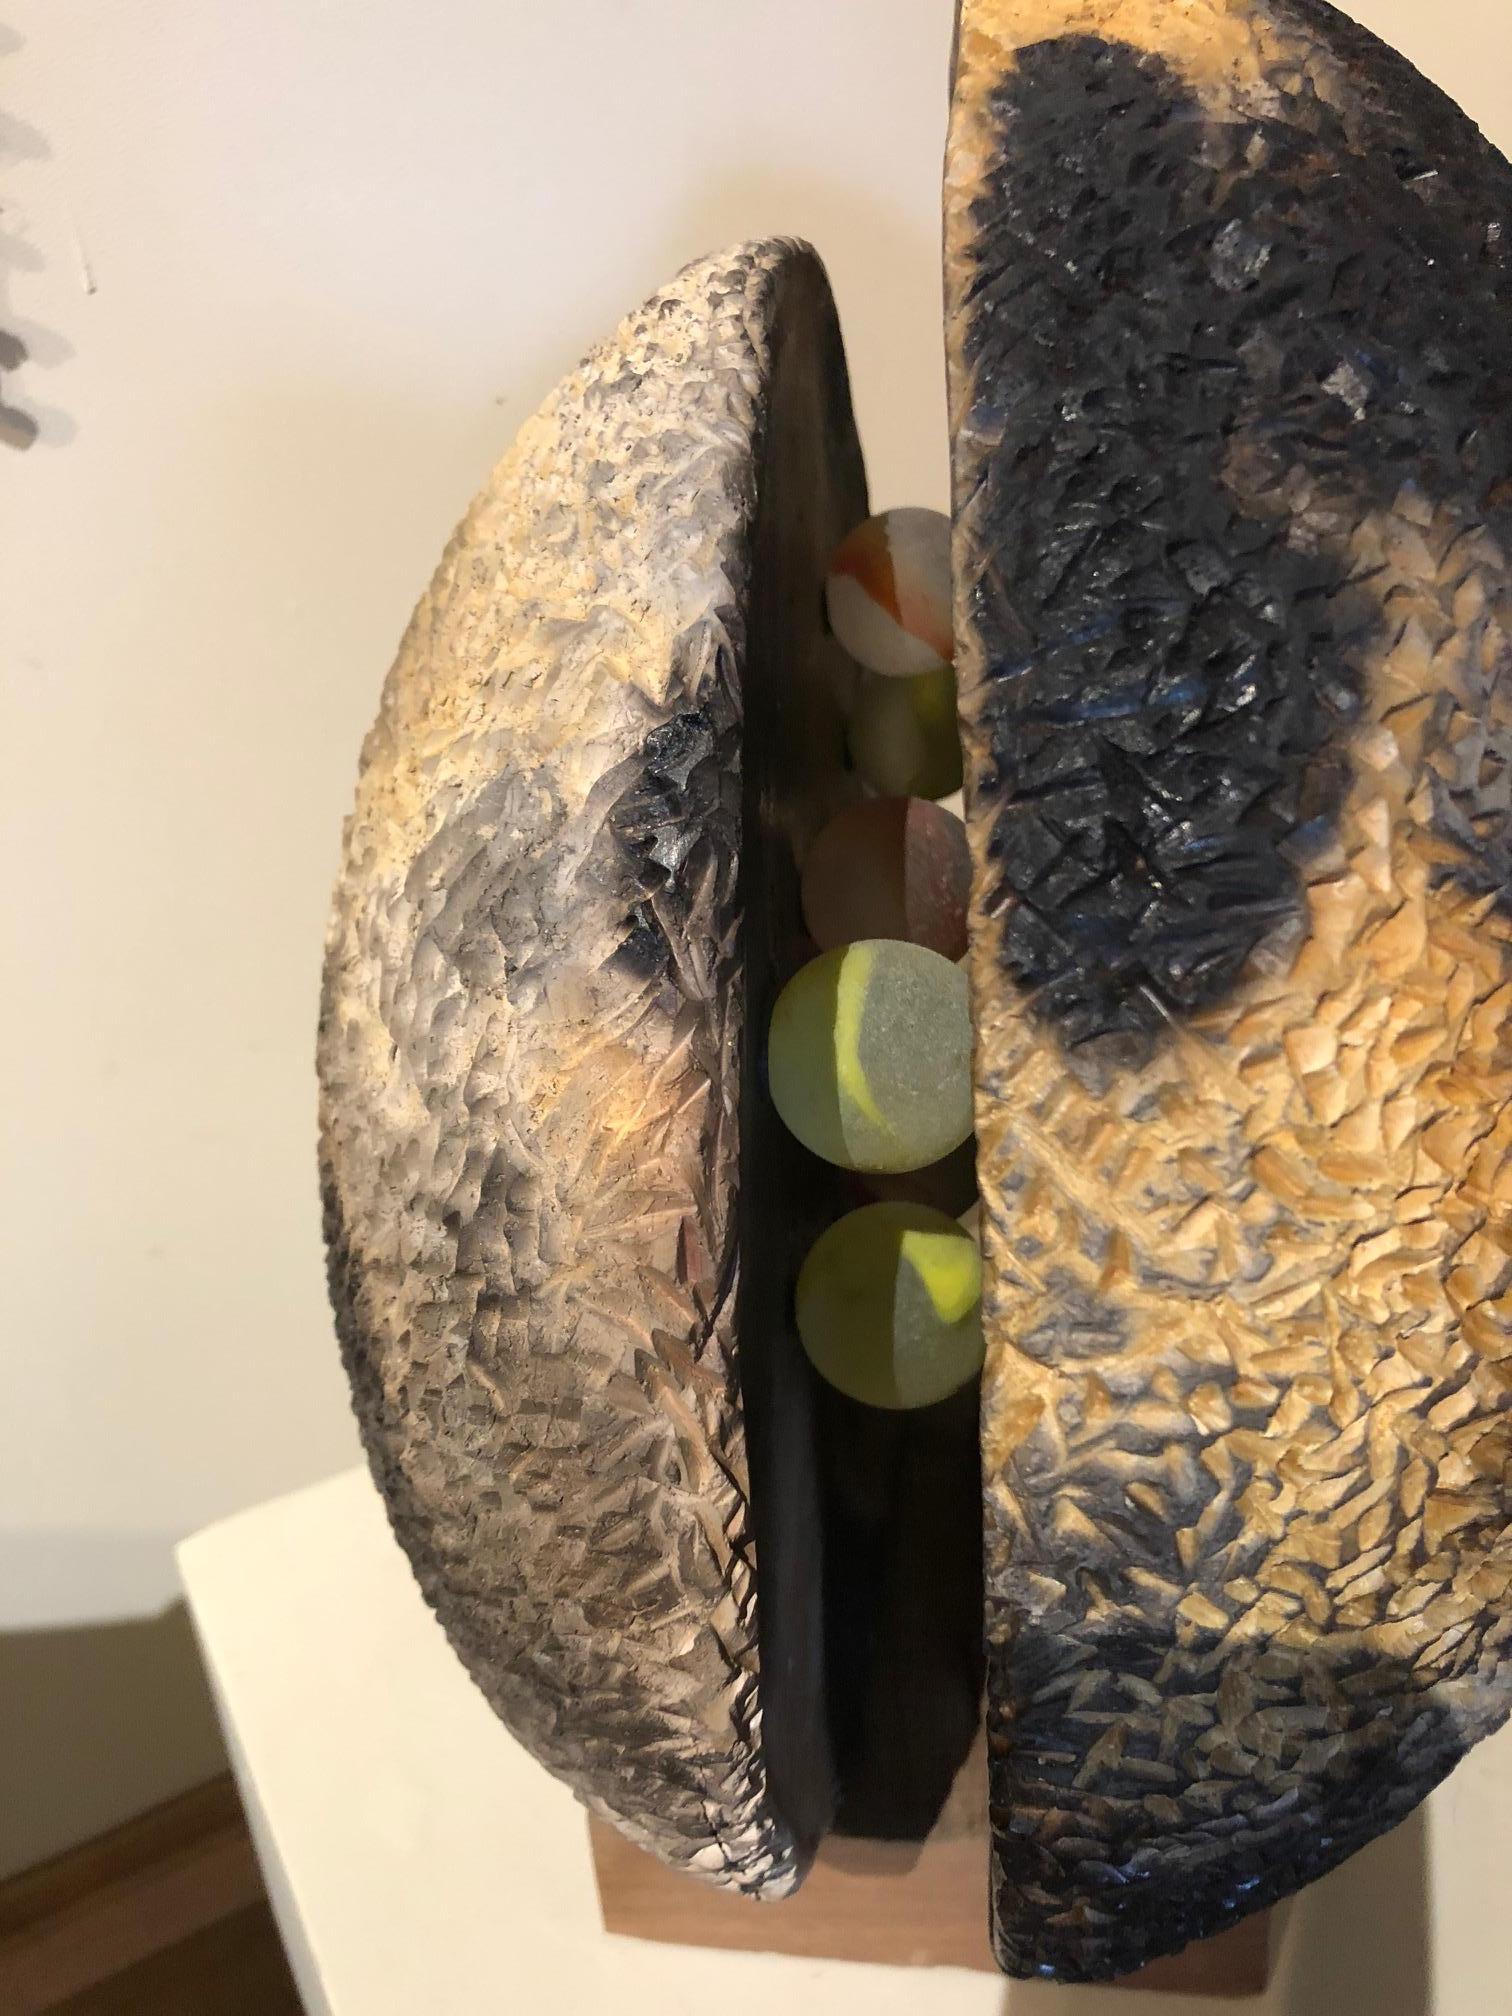 An abstract round sculpture suggesting a planet, having two halves of gorgeously fired and carved clay with glass round marbles inside. By renowned artist Connie McIndoe.